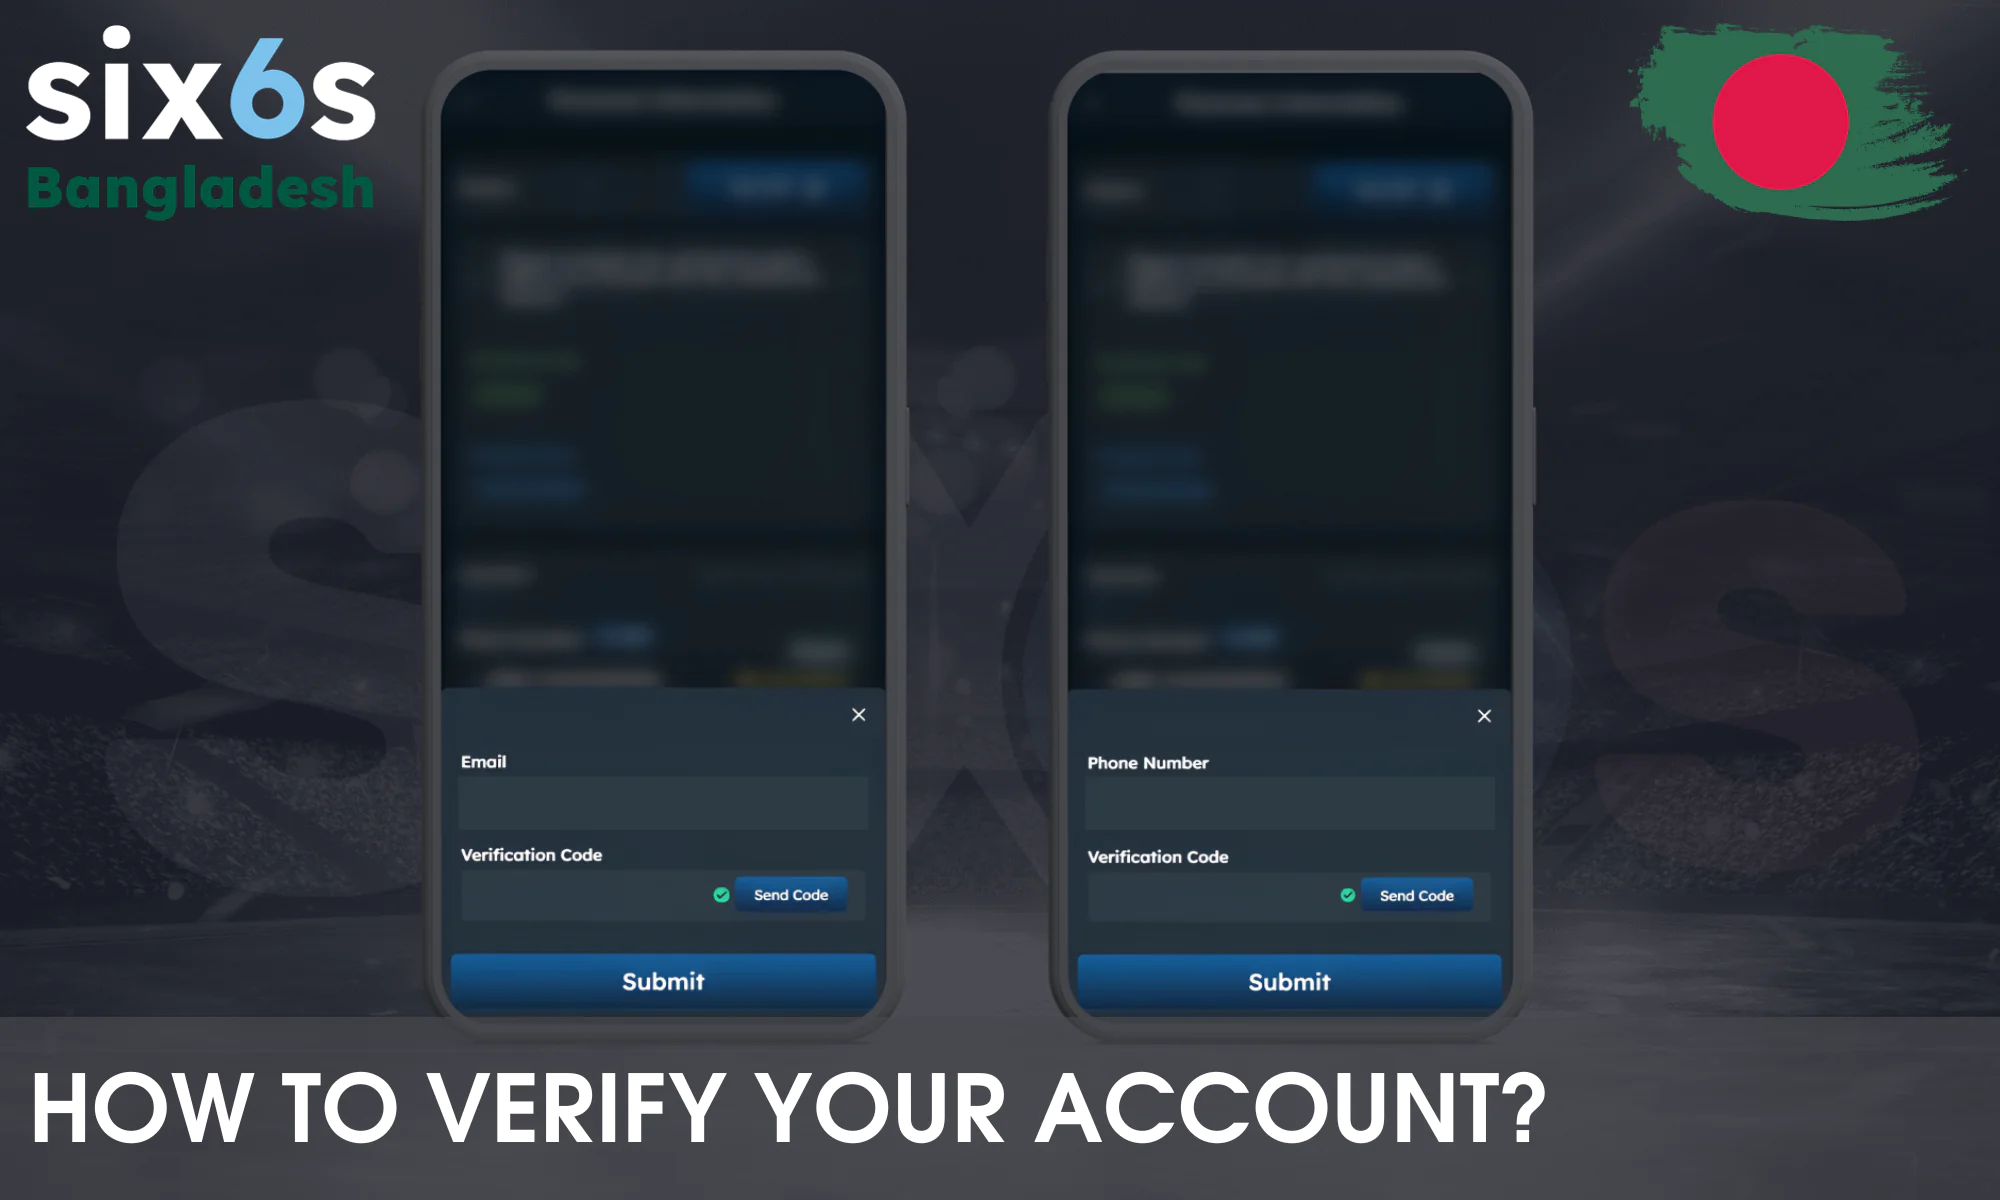 Instructions on how to verify your Six6s account